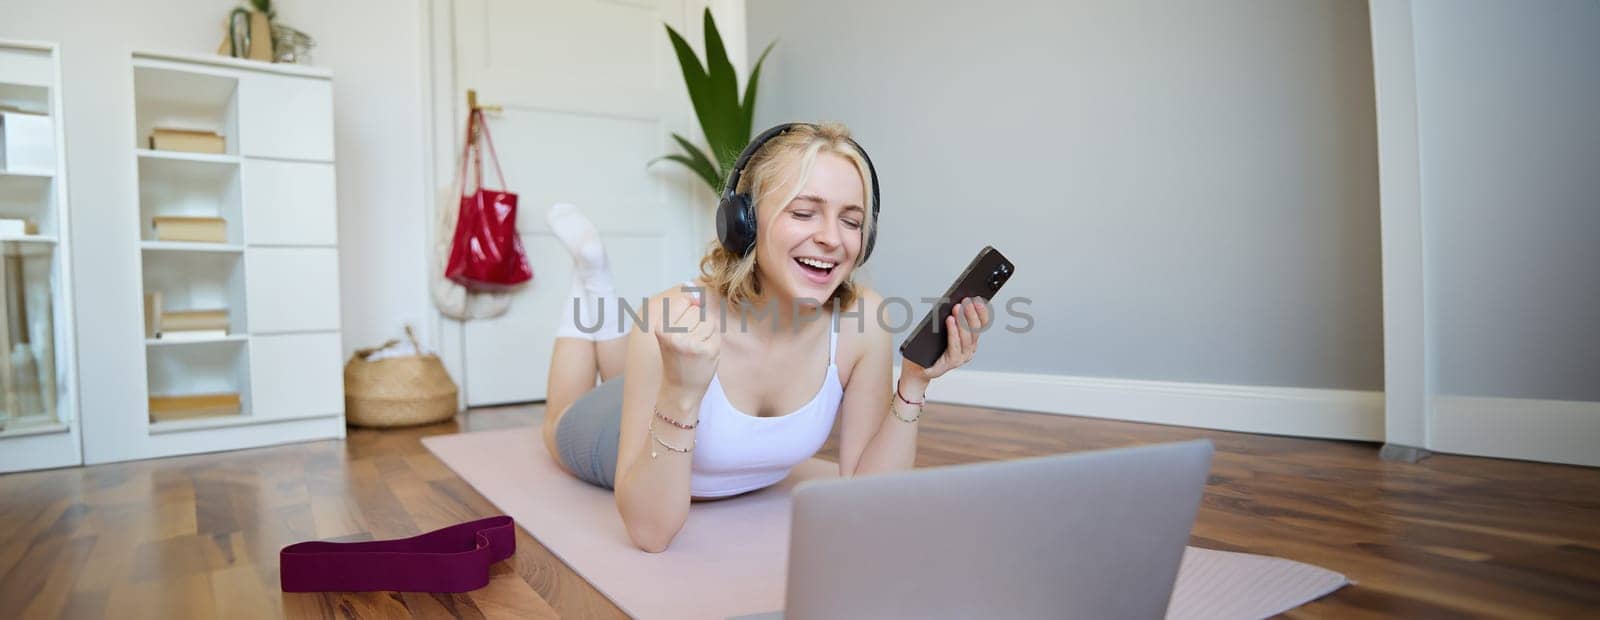 Portrait of happy blond woman in headphones, lying on rubber mat, listens to music in headphones after workout training session, using laptop.